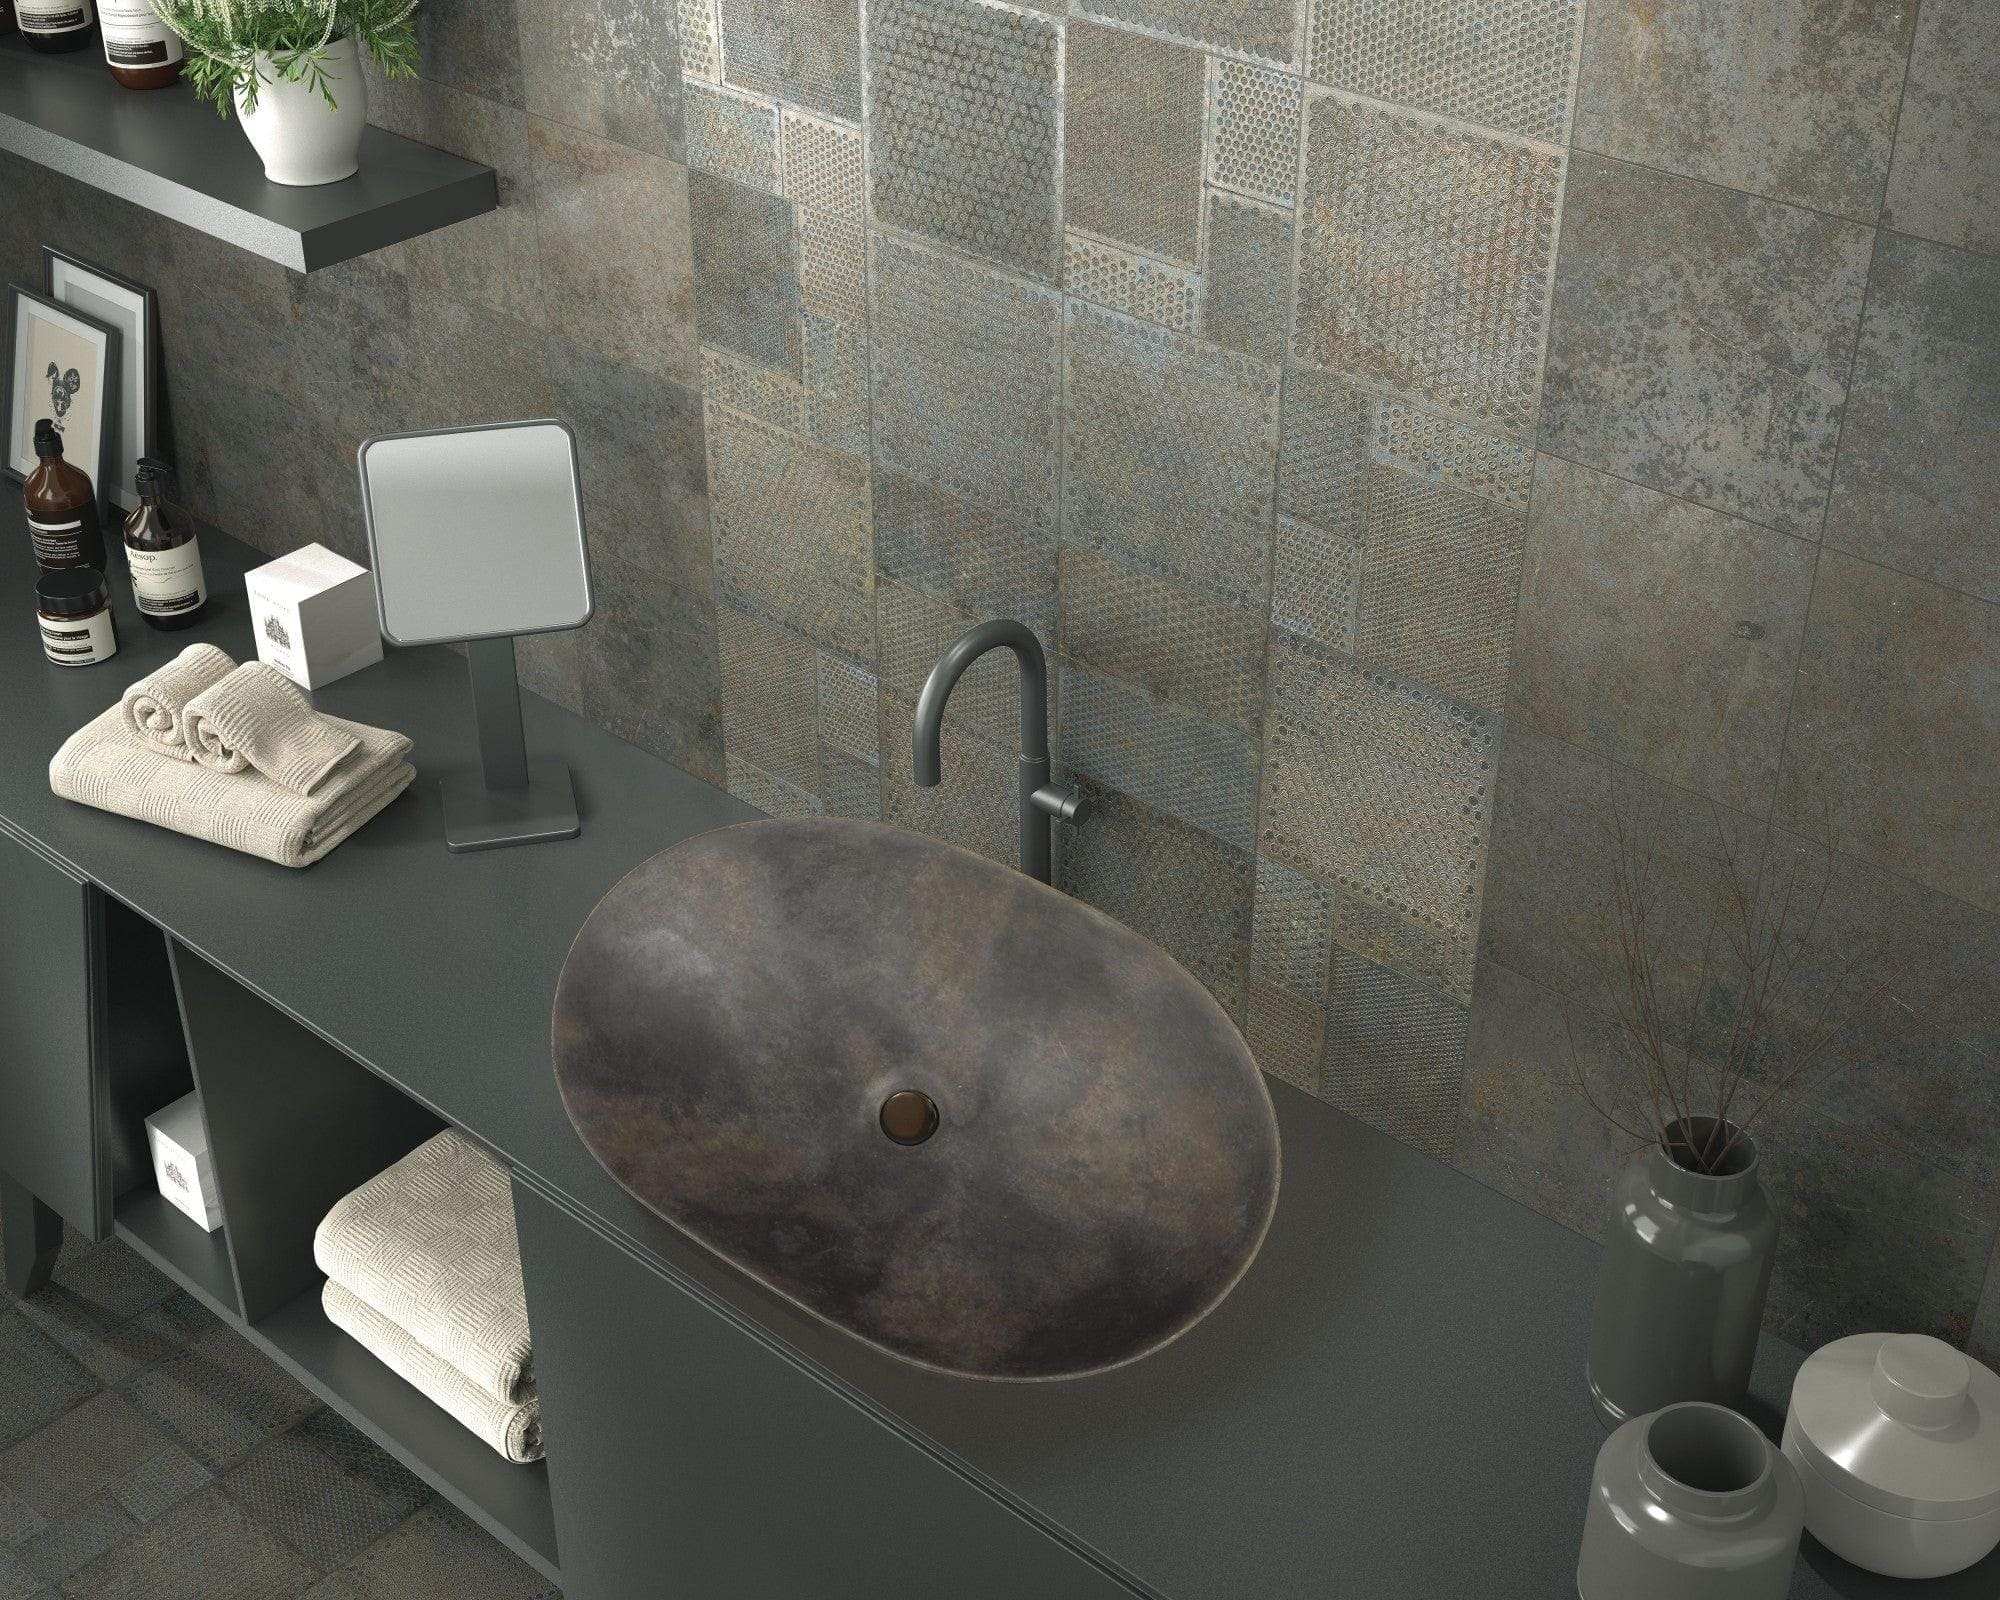 Hyperion Tiles All Products 40 x 40 x 15cm Lavabo Diurne Oxide